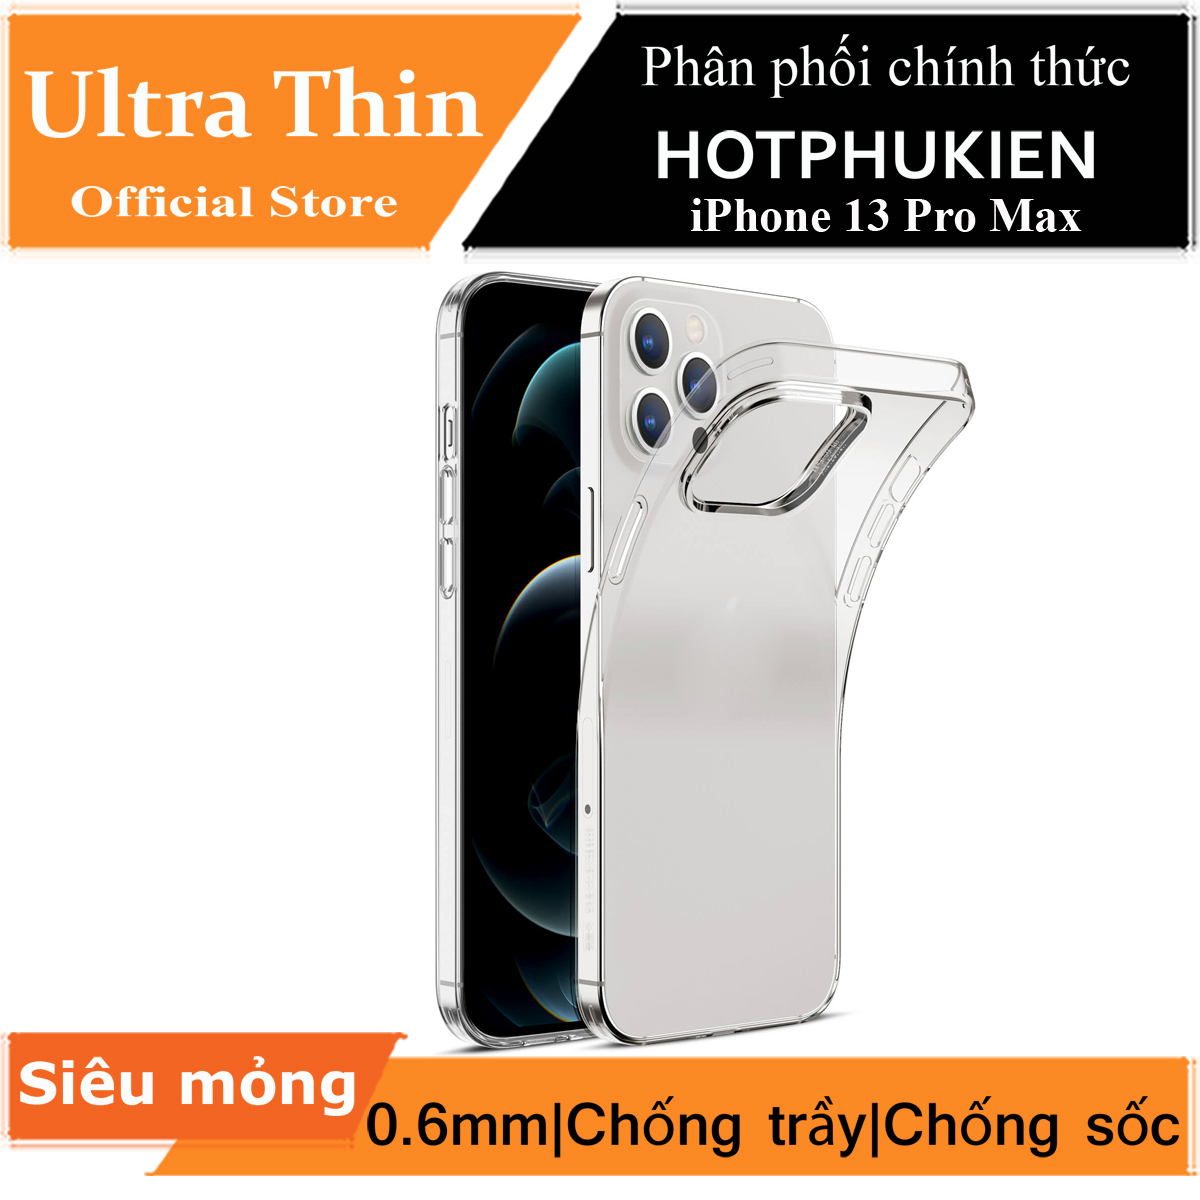 Ốp lưng dẻo silicon trong suốt cho iPhone 13 Pro Max hiệu Ultra Thin